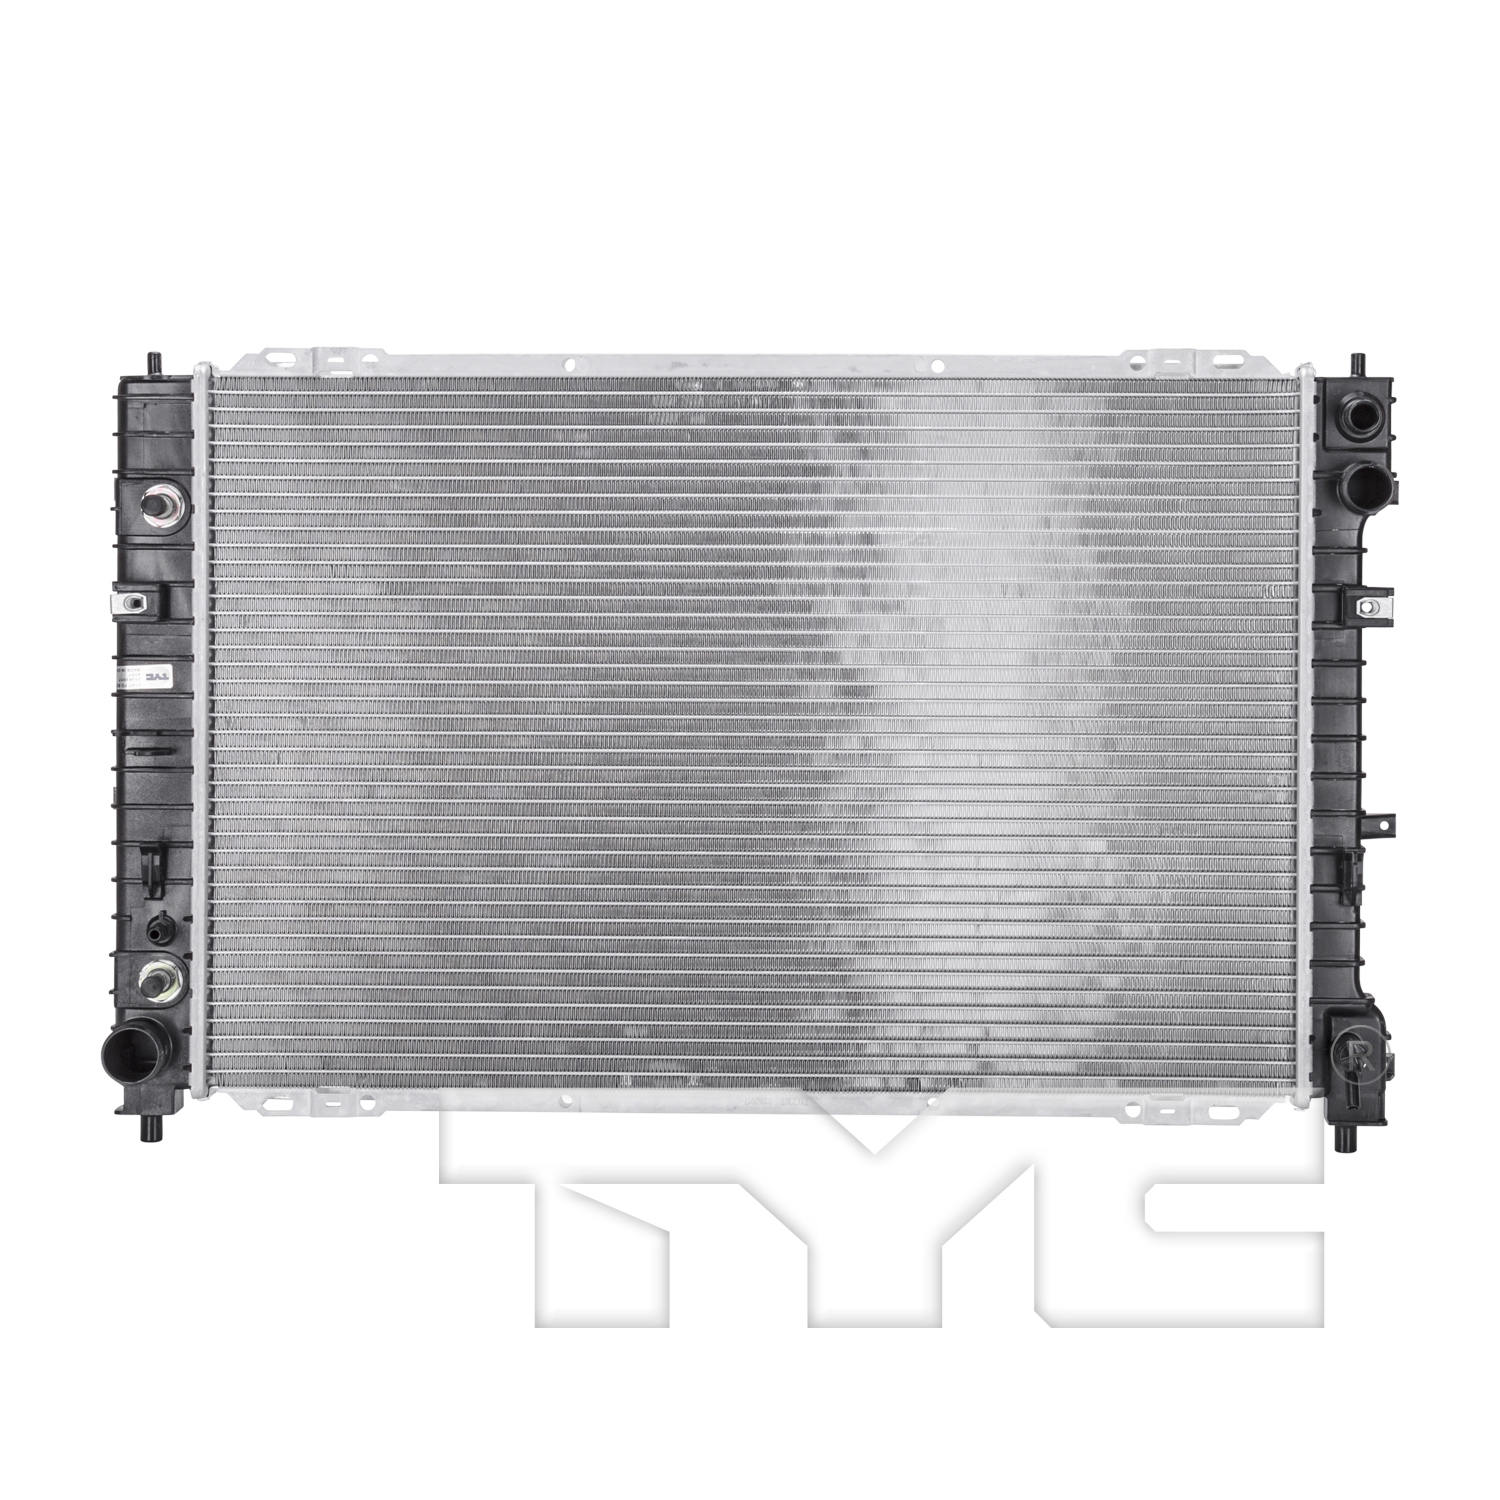 Aftermarket RADIATORS for FORD - ESCAPE, ESCAPE,01-07,Radiator assembly